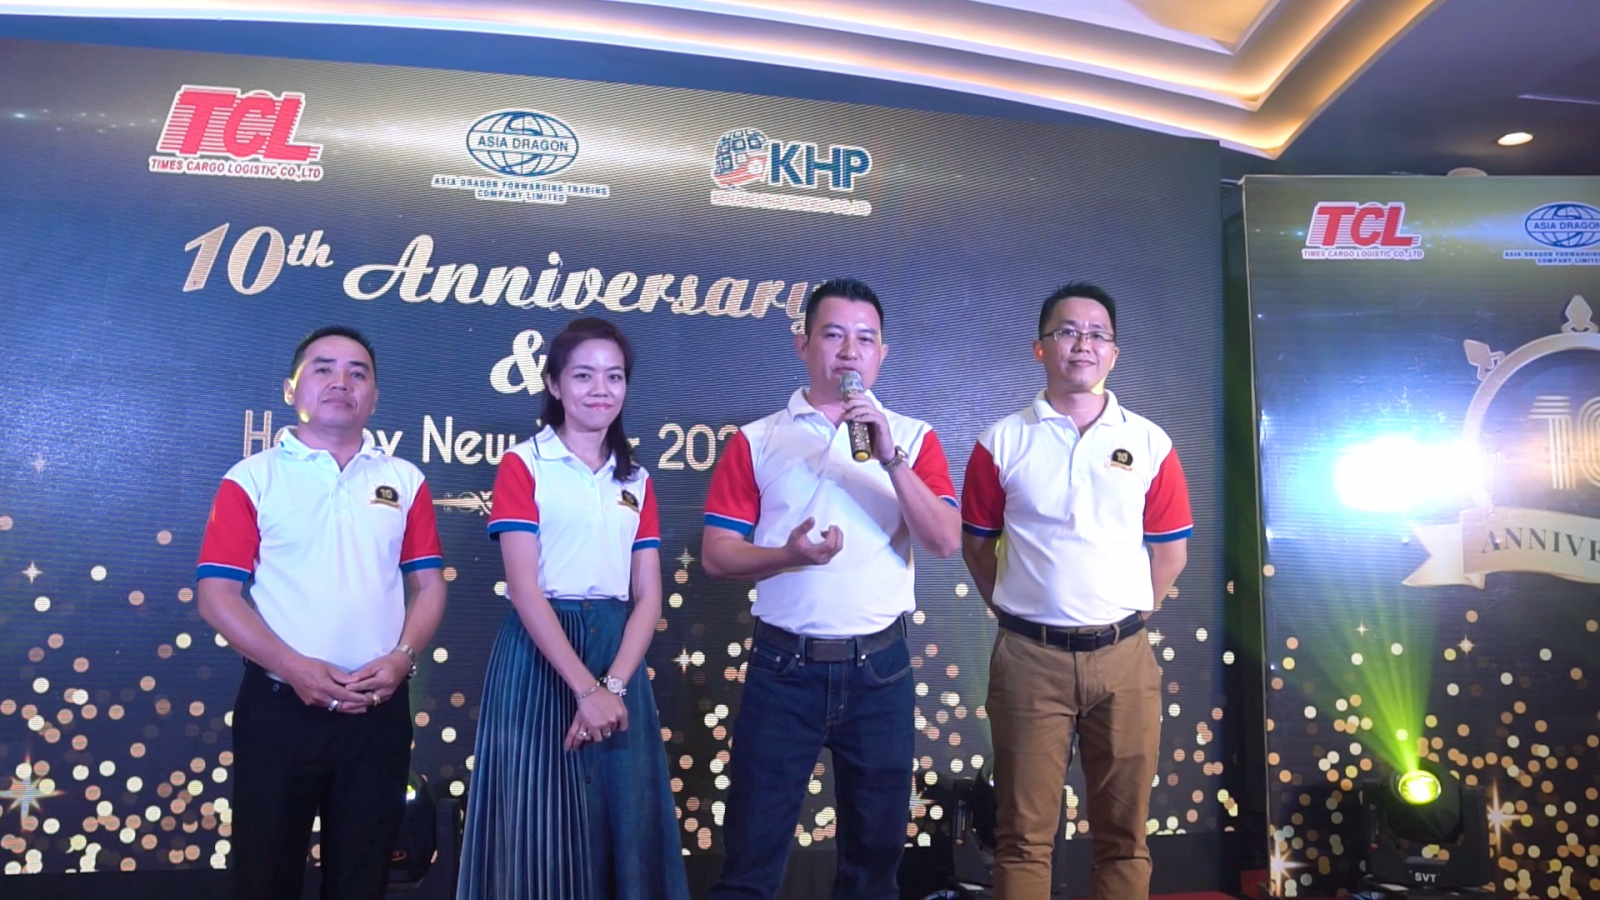 ky-niem-10-nam-thanh-lap-cong-ty-times-cargo-logistic-va-cong-ty-rong-a-chau-6